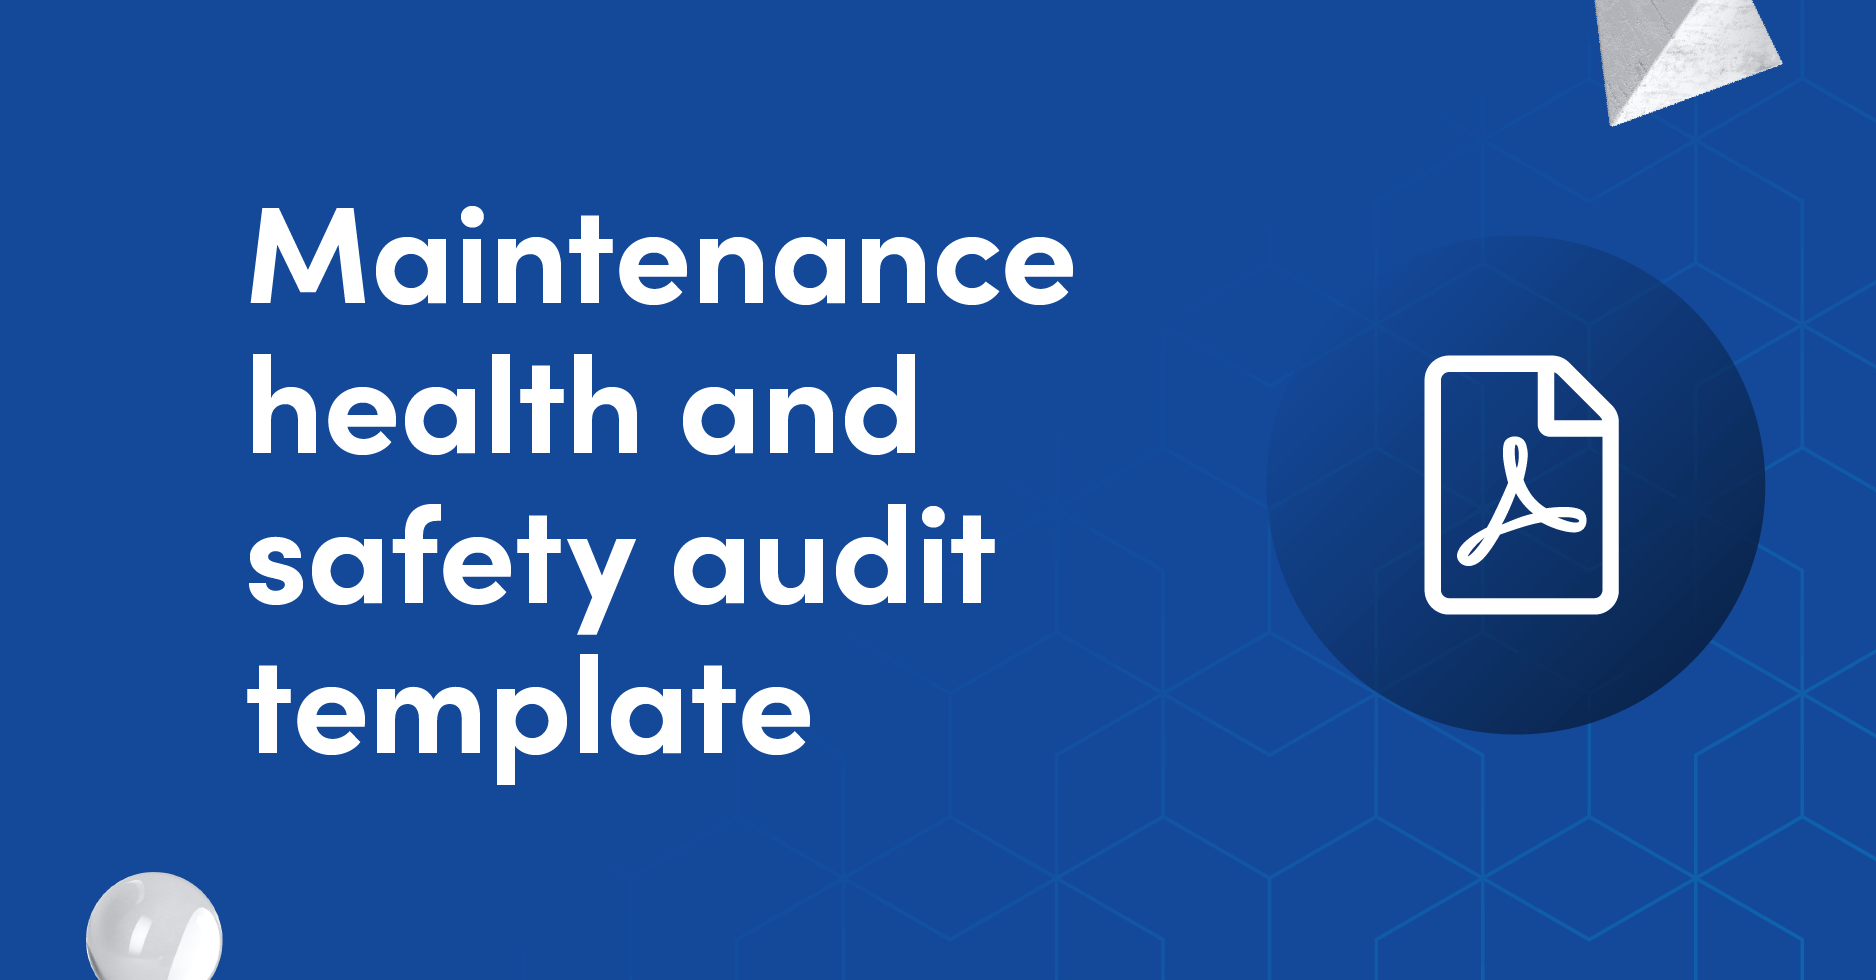 Maintenance health and safety audit template graphic